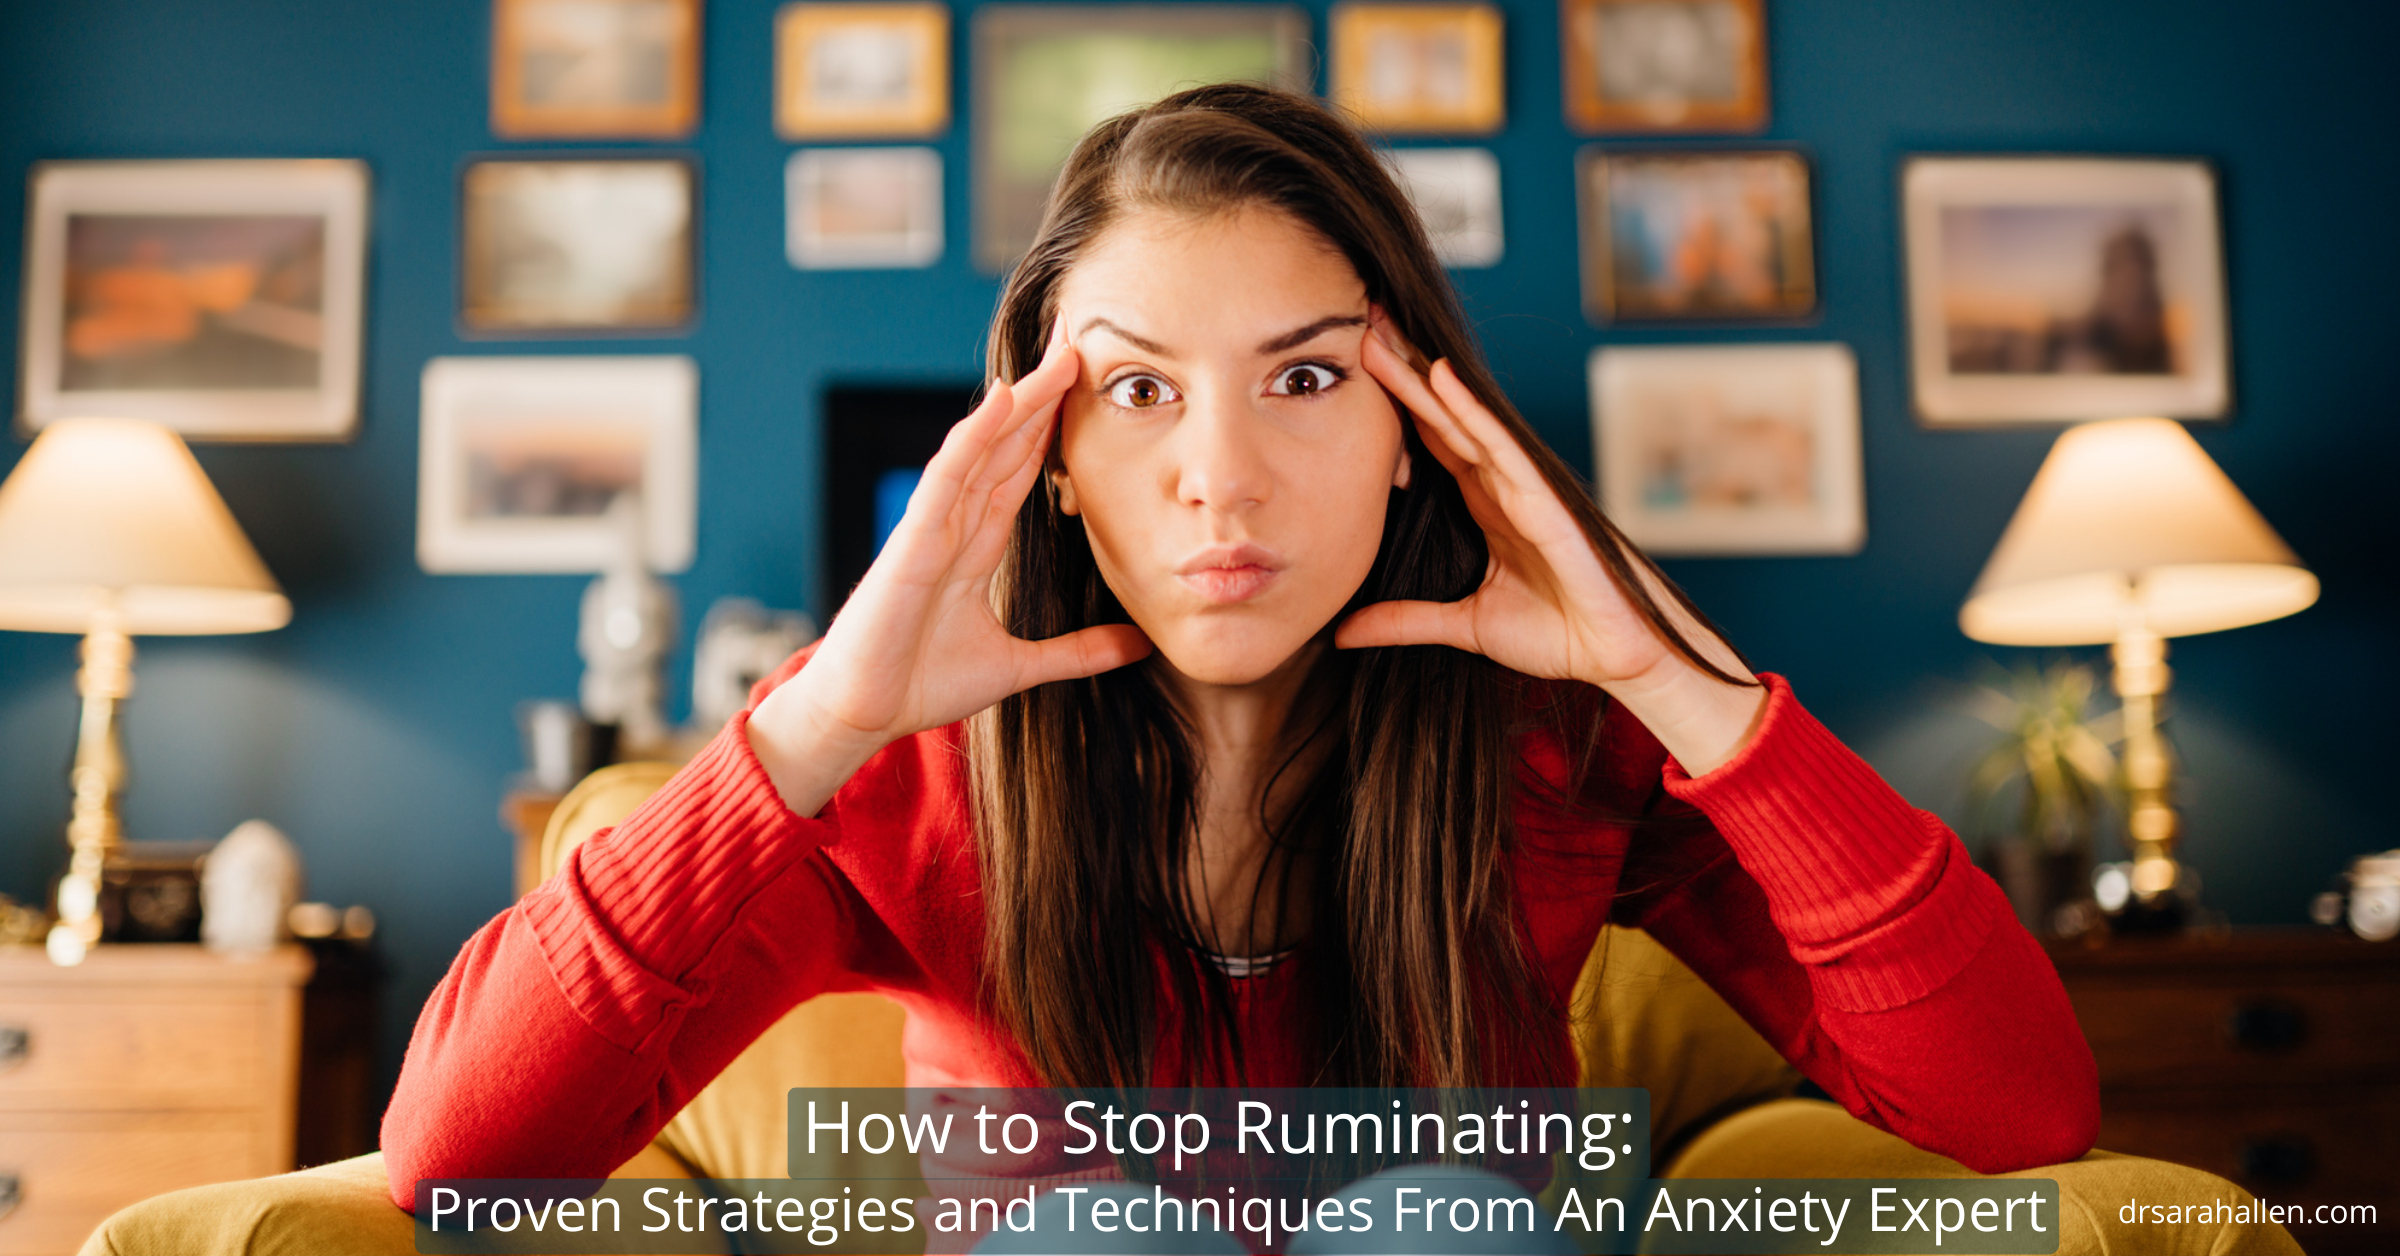 How to stop ruminating - proven strategies from an anxiety expert